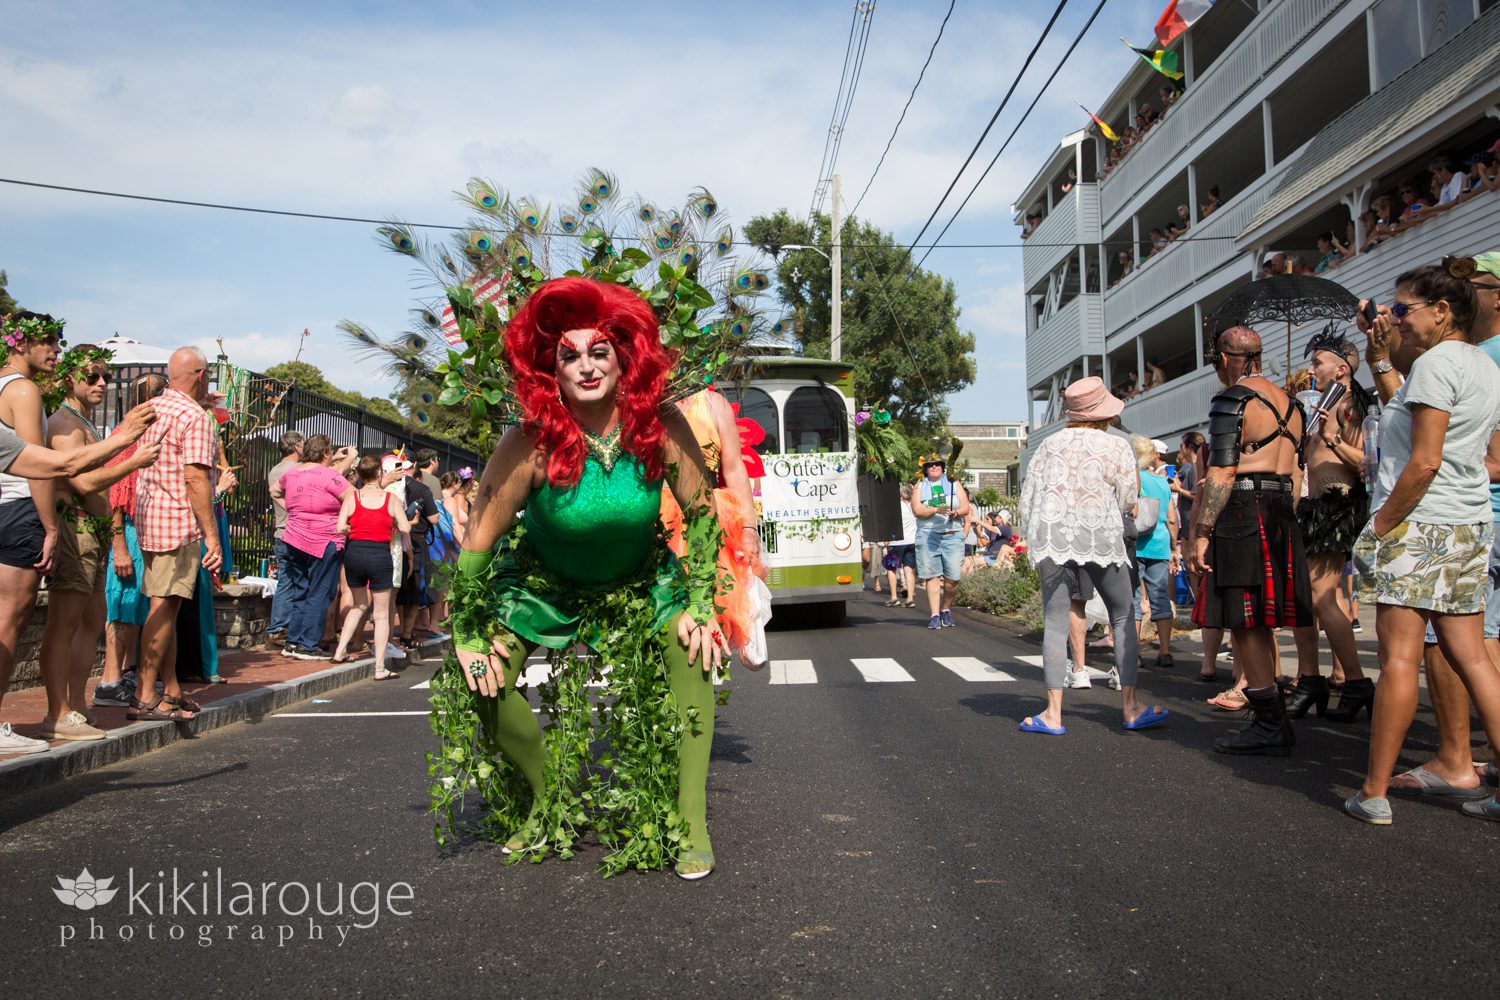 Drag queen with red hair and Peacock feathers